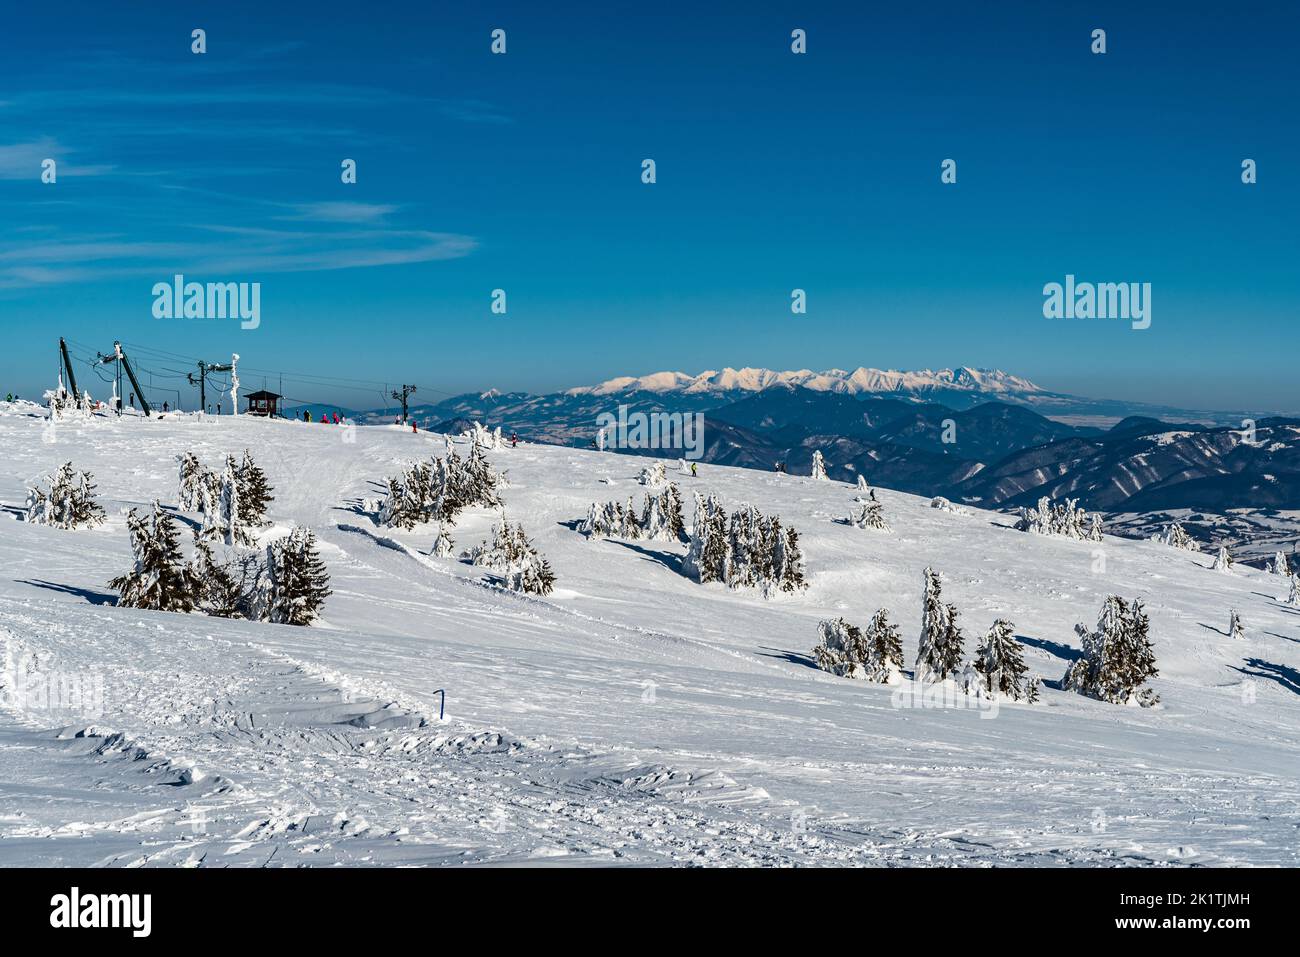 Ski resort Martinky on Martinske hole in Mala Fatra mountains with Tatra mountains on the background in Slovakia during beautiful winter day Stock Photo